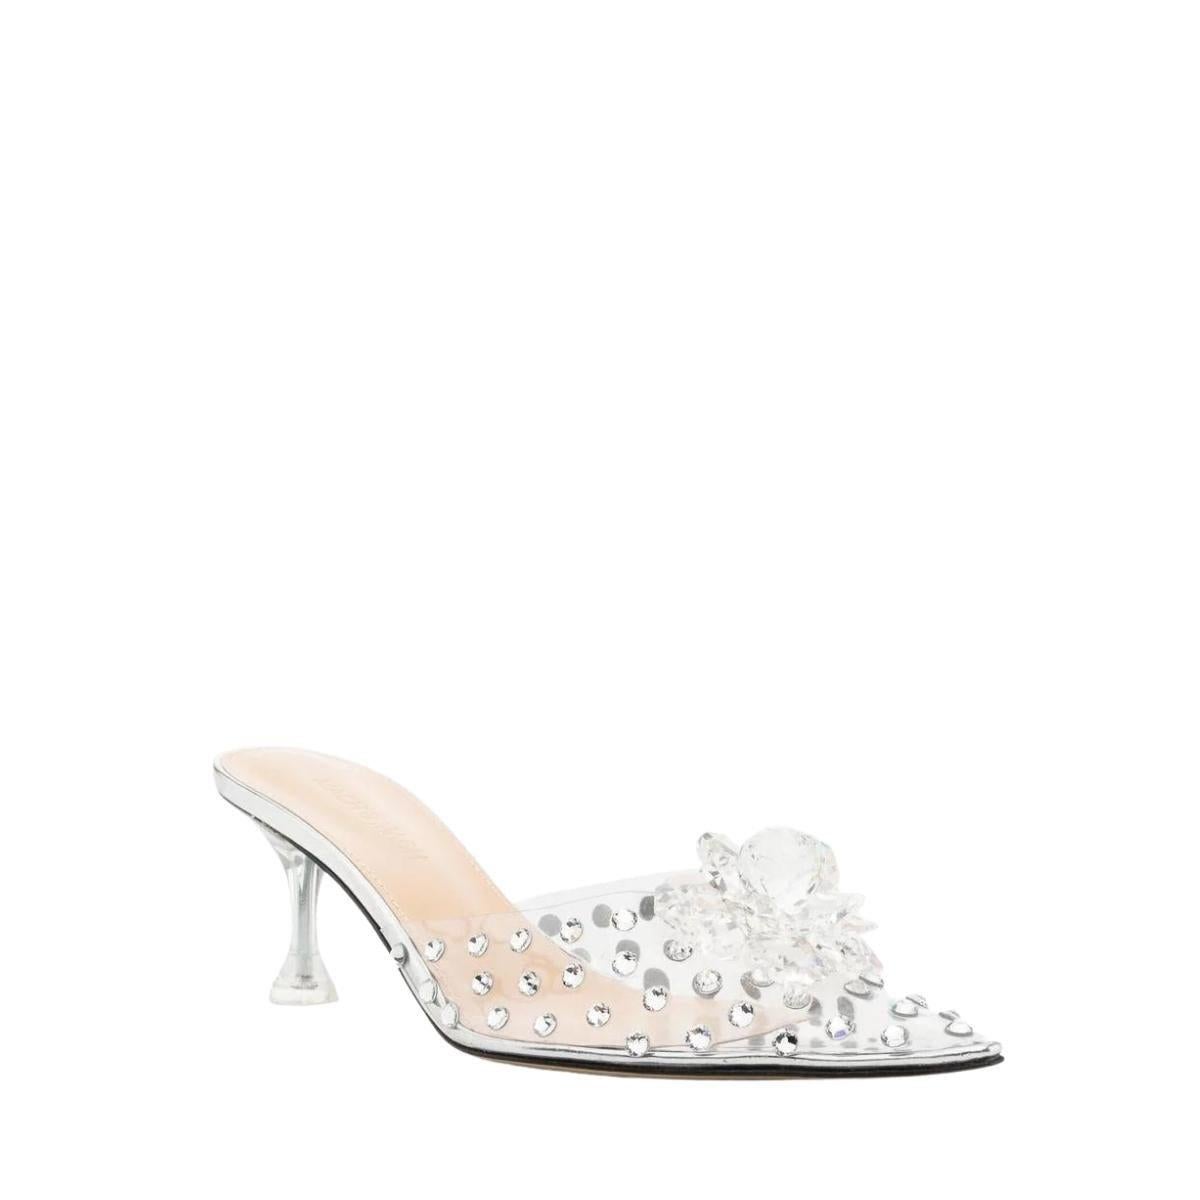 Crystal-embellished transparent mules
Transparent design
Crystal embellishment
Floral detail
Pointed toe
Low heel
Open back
Composition: PVC 100%, silver leather
Sole: Leather 100%
Inner: PVC 100%
Heel: 2.8